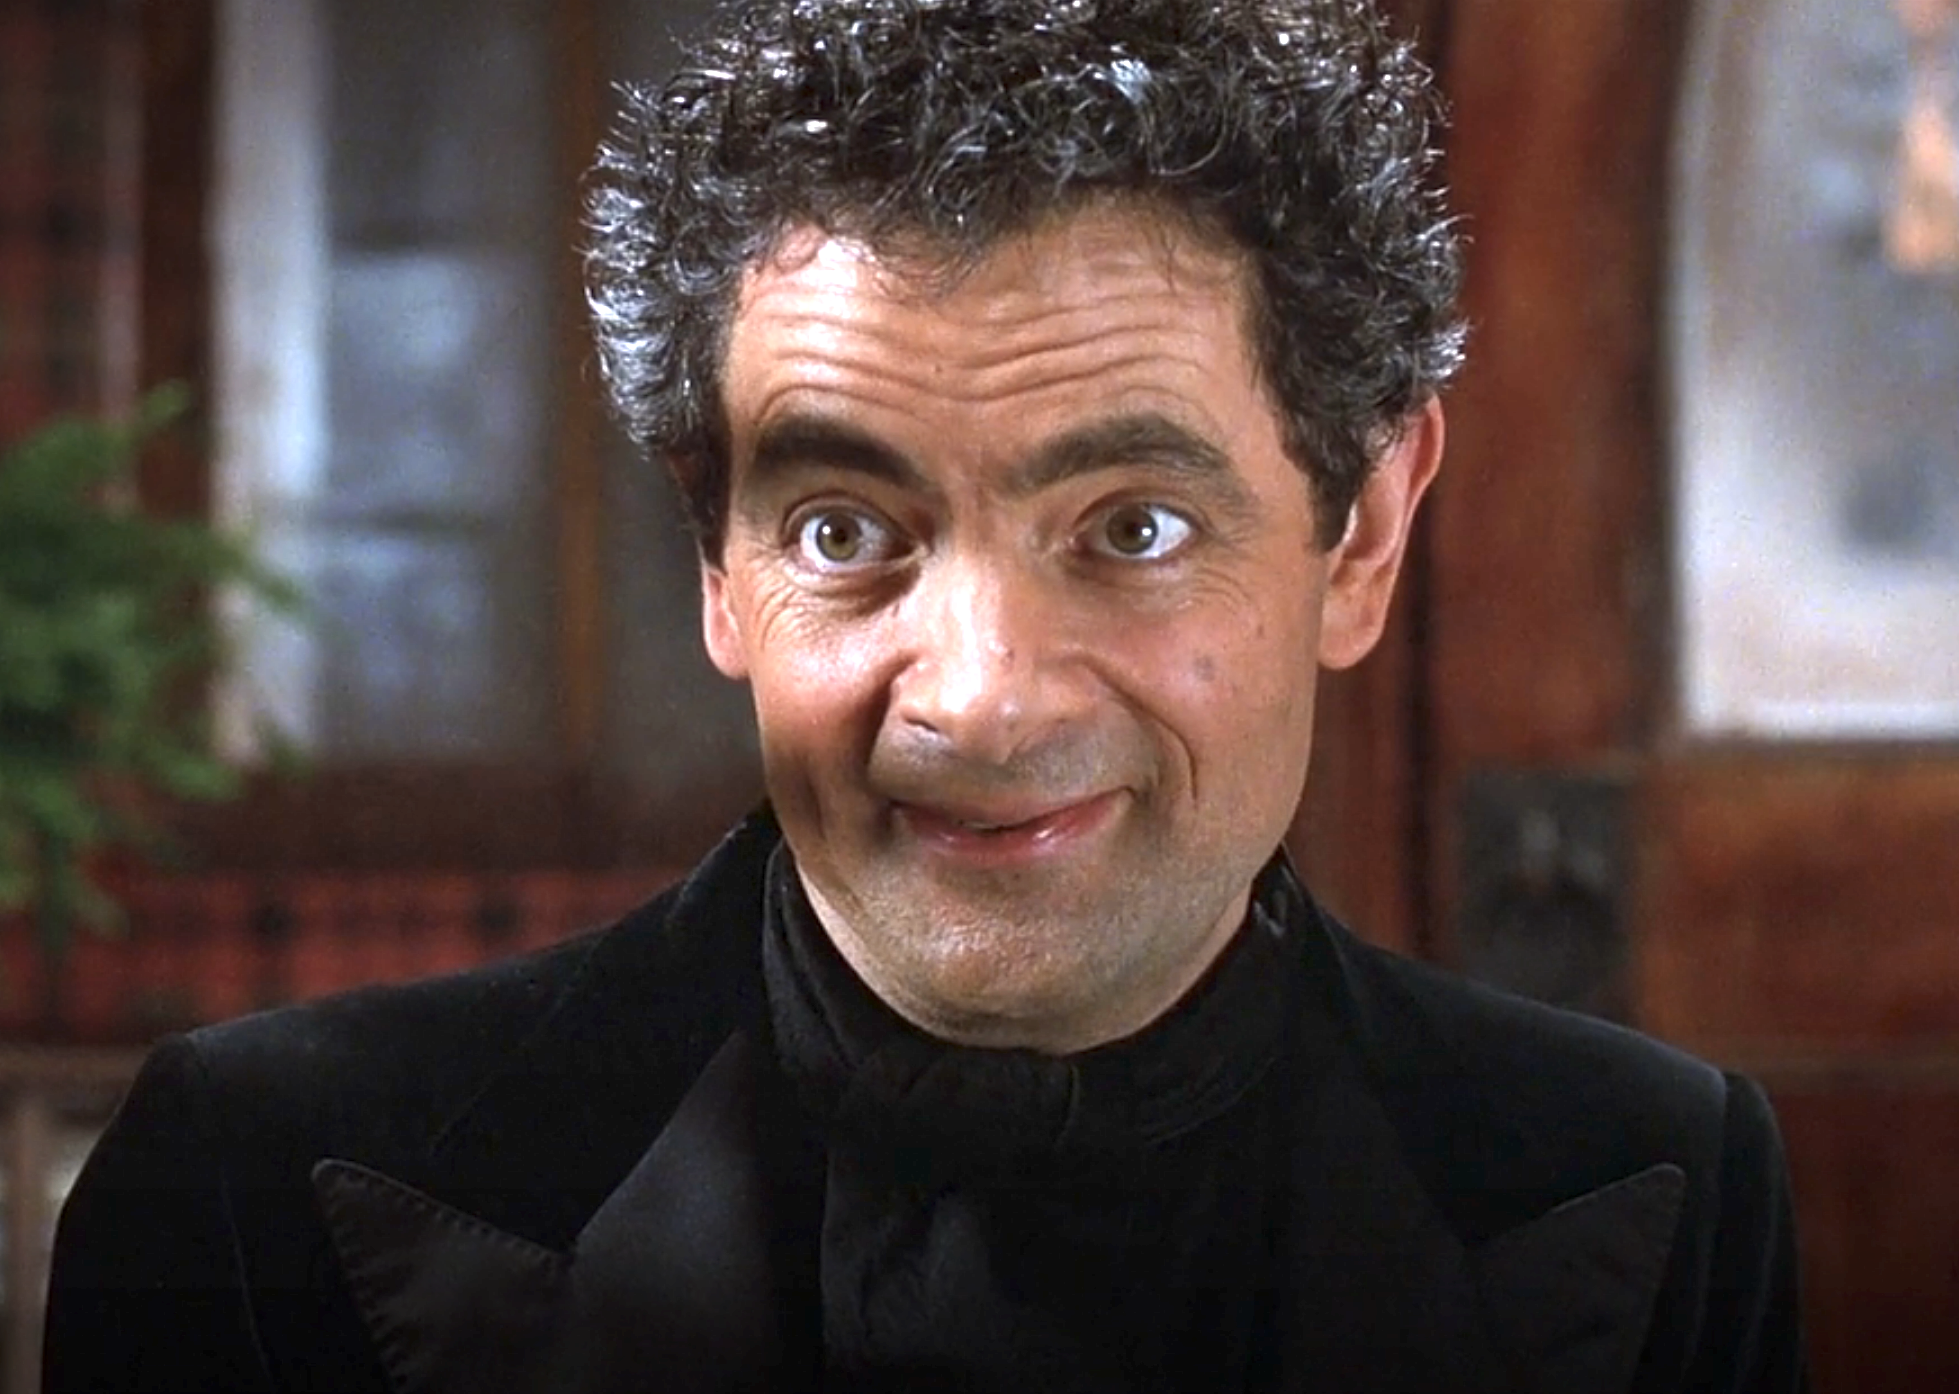 Rowan Atkinson as Mondavarious with curly hair looking sinister